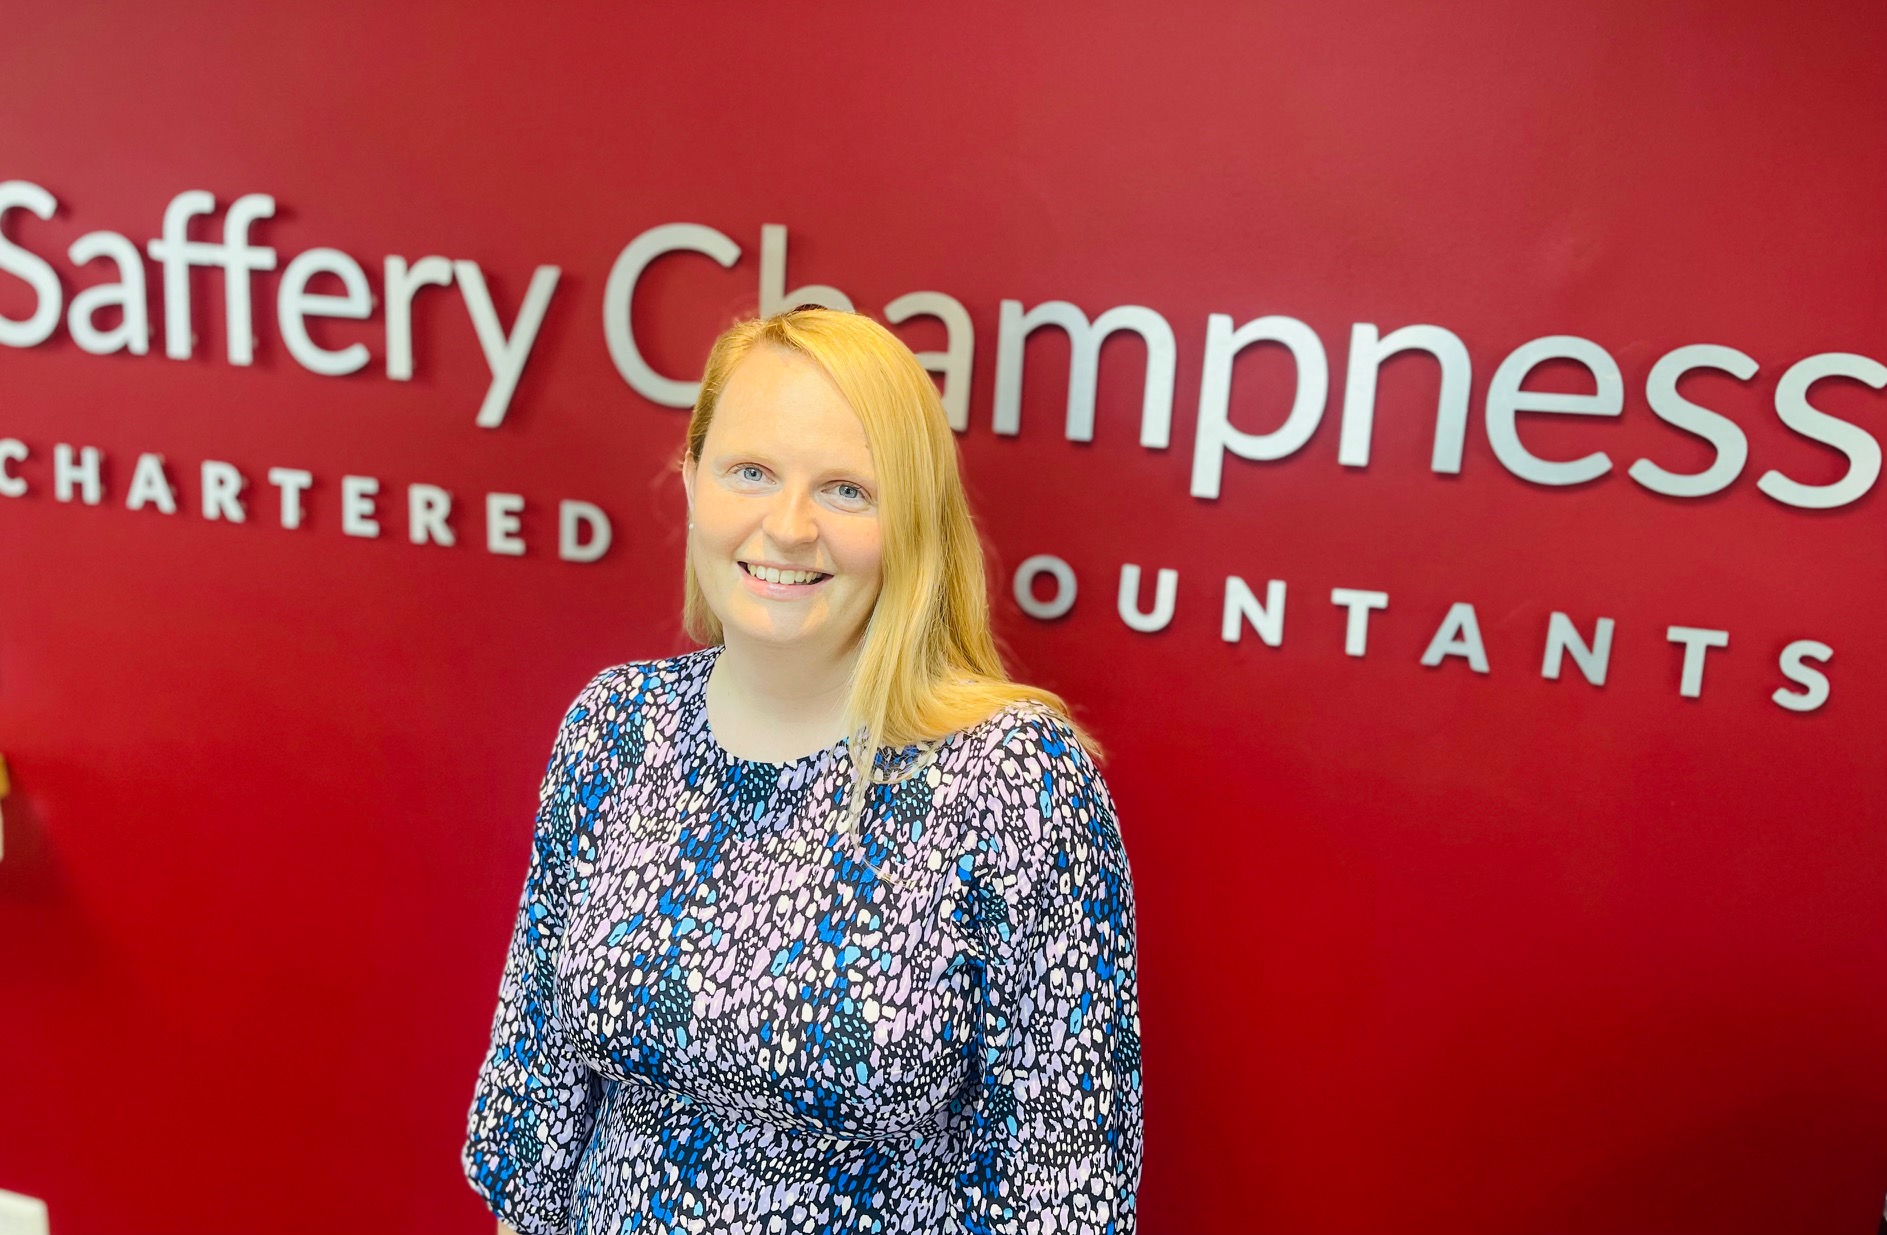 Casidhe appointed Partner at Saffery Champness in Bournemouth